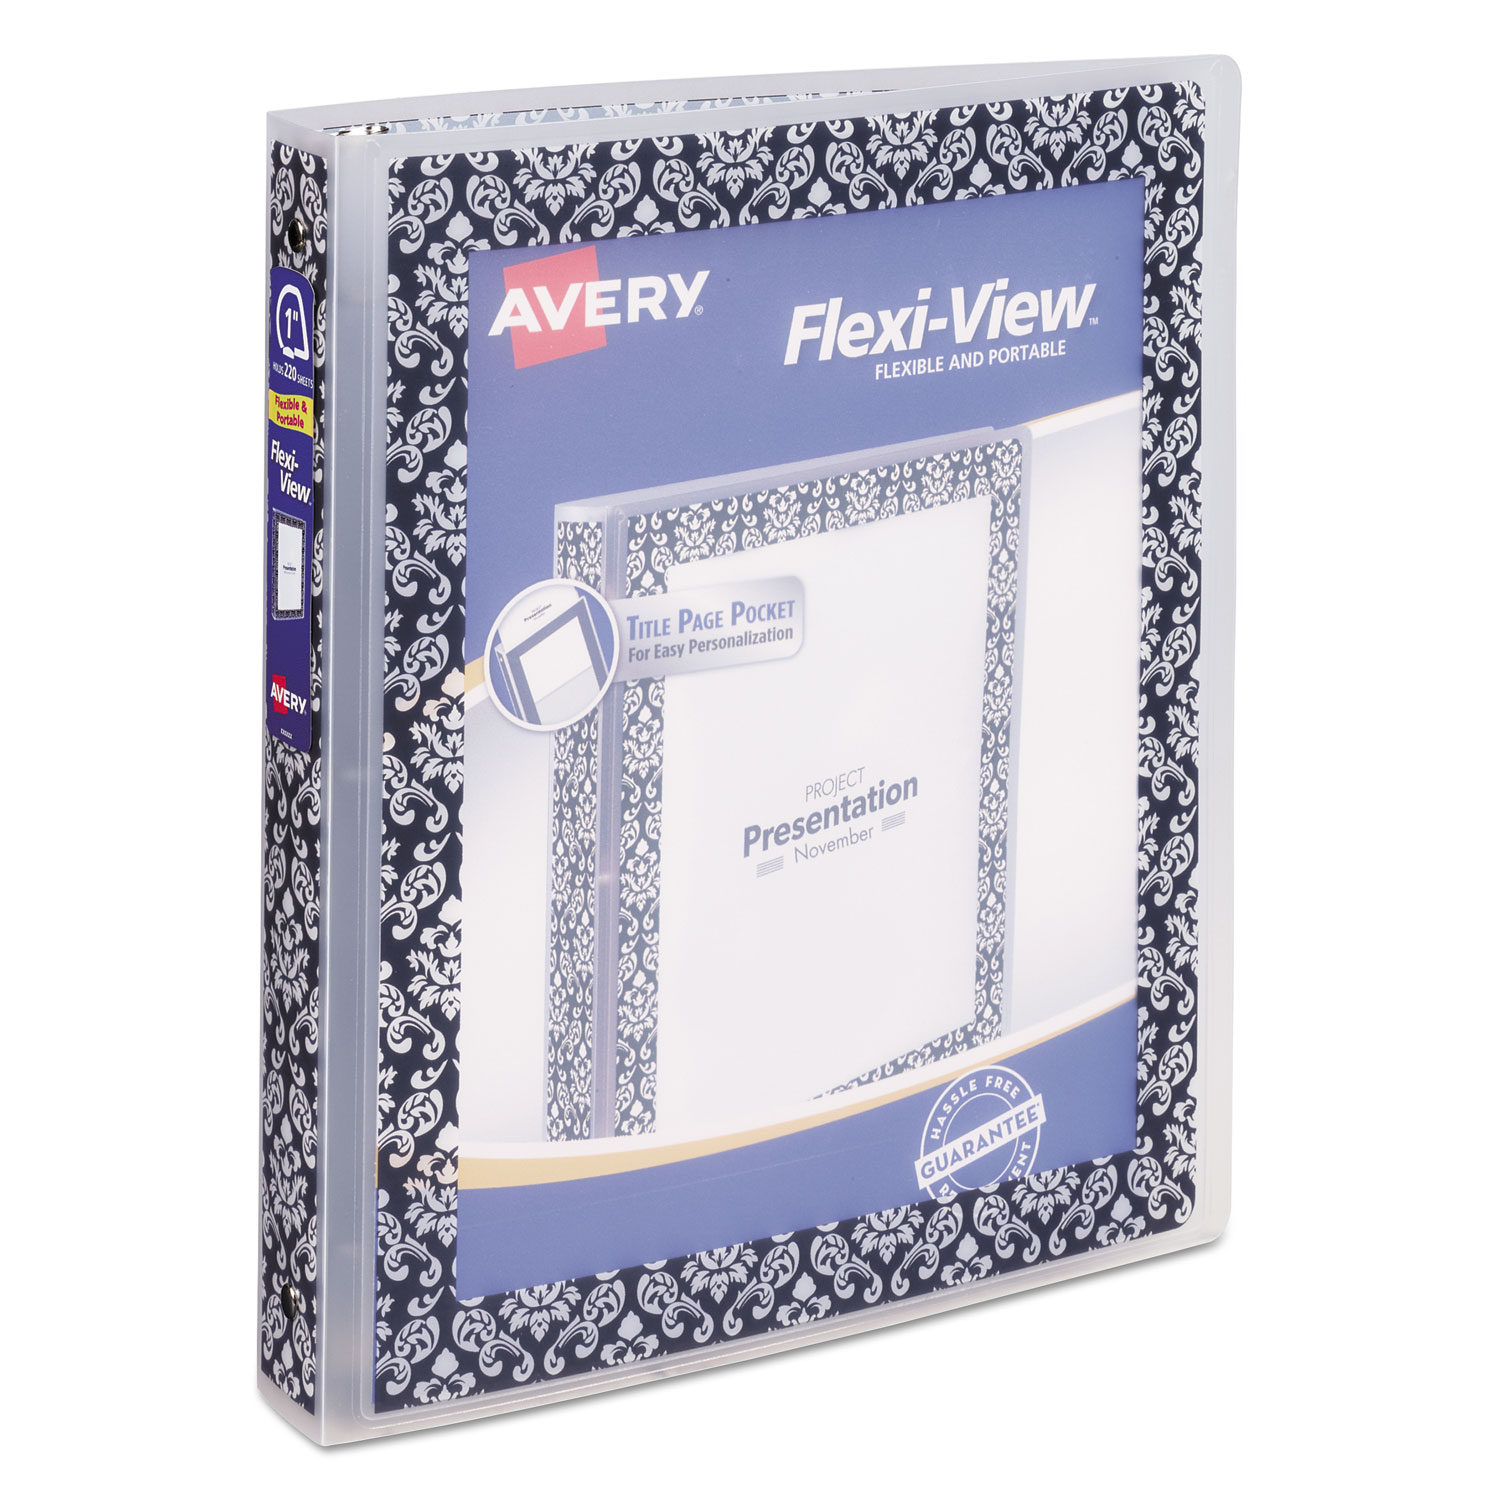  Avery 17644 Flexi-View Binder with Round Rings, 3 Rings, 1 Capacity, 11 x 8.5, Black/White Damask (AVE17644) 